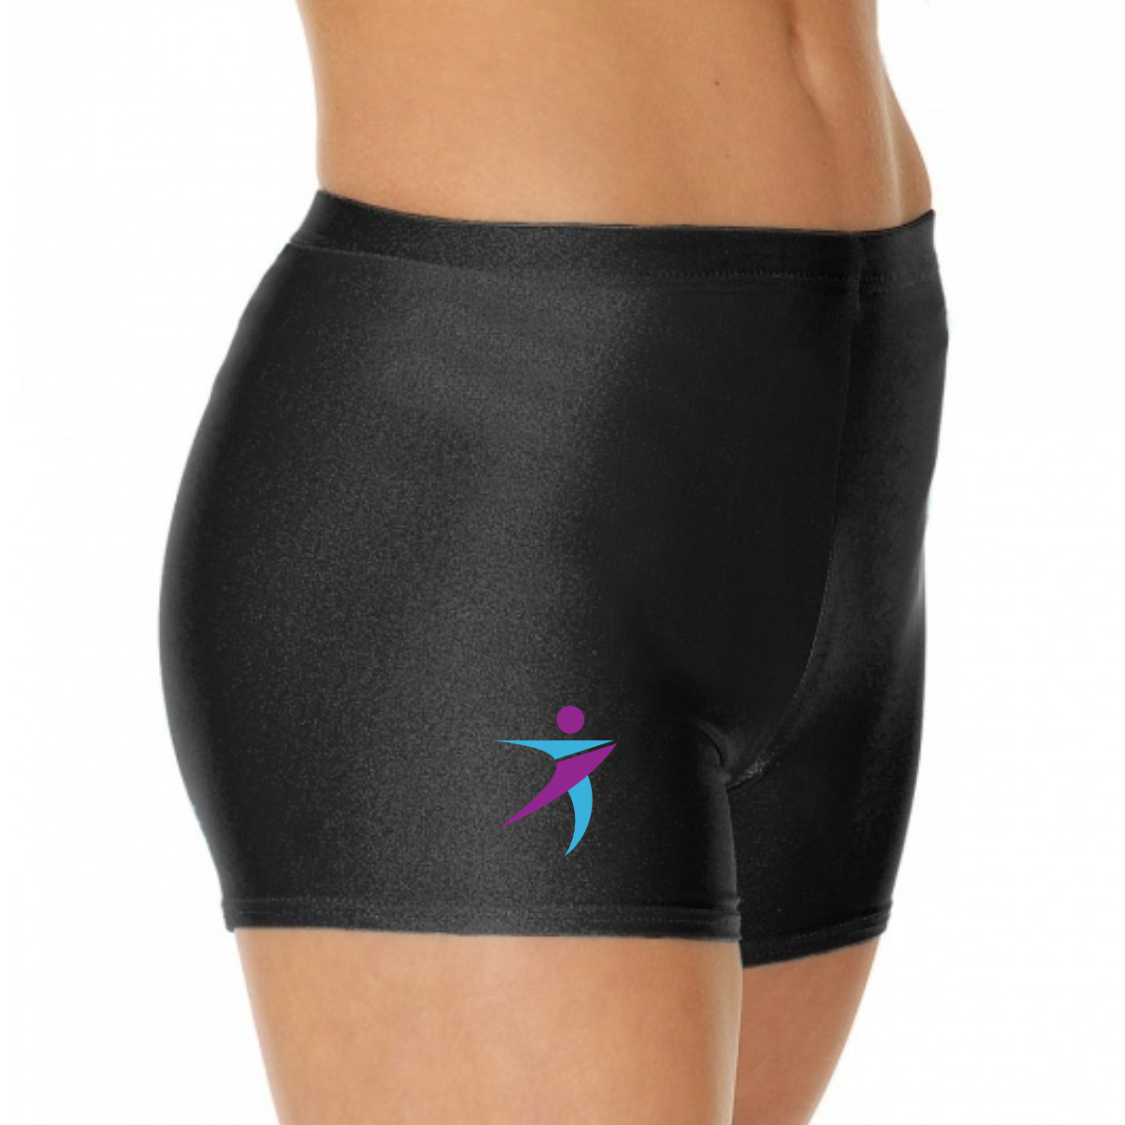 Arabesque Micro Shorts (Age 5 to Adult)